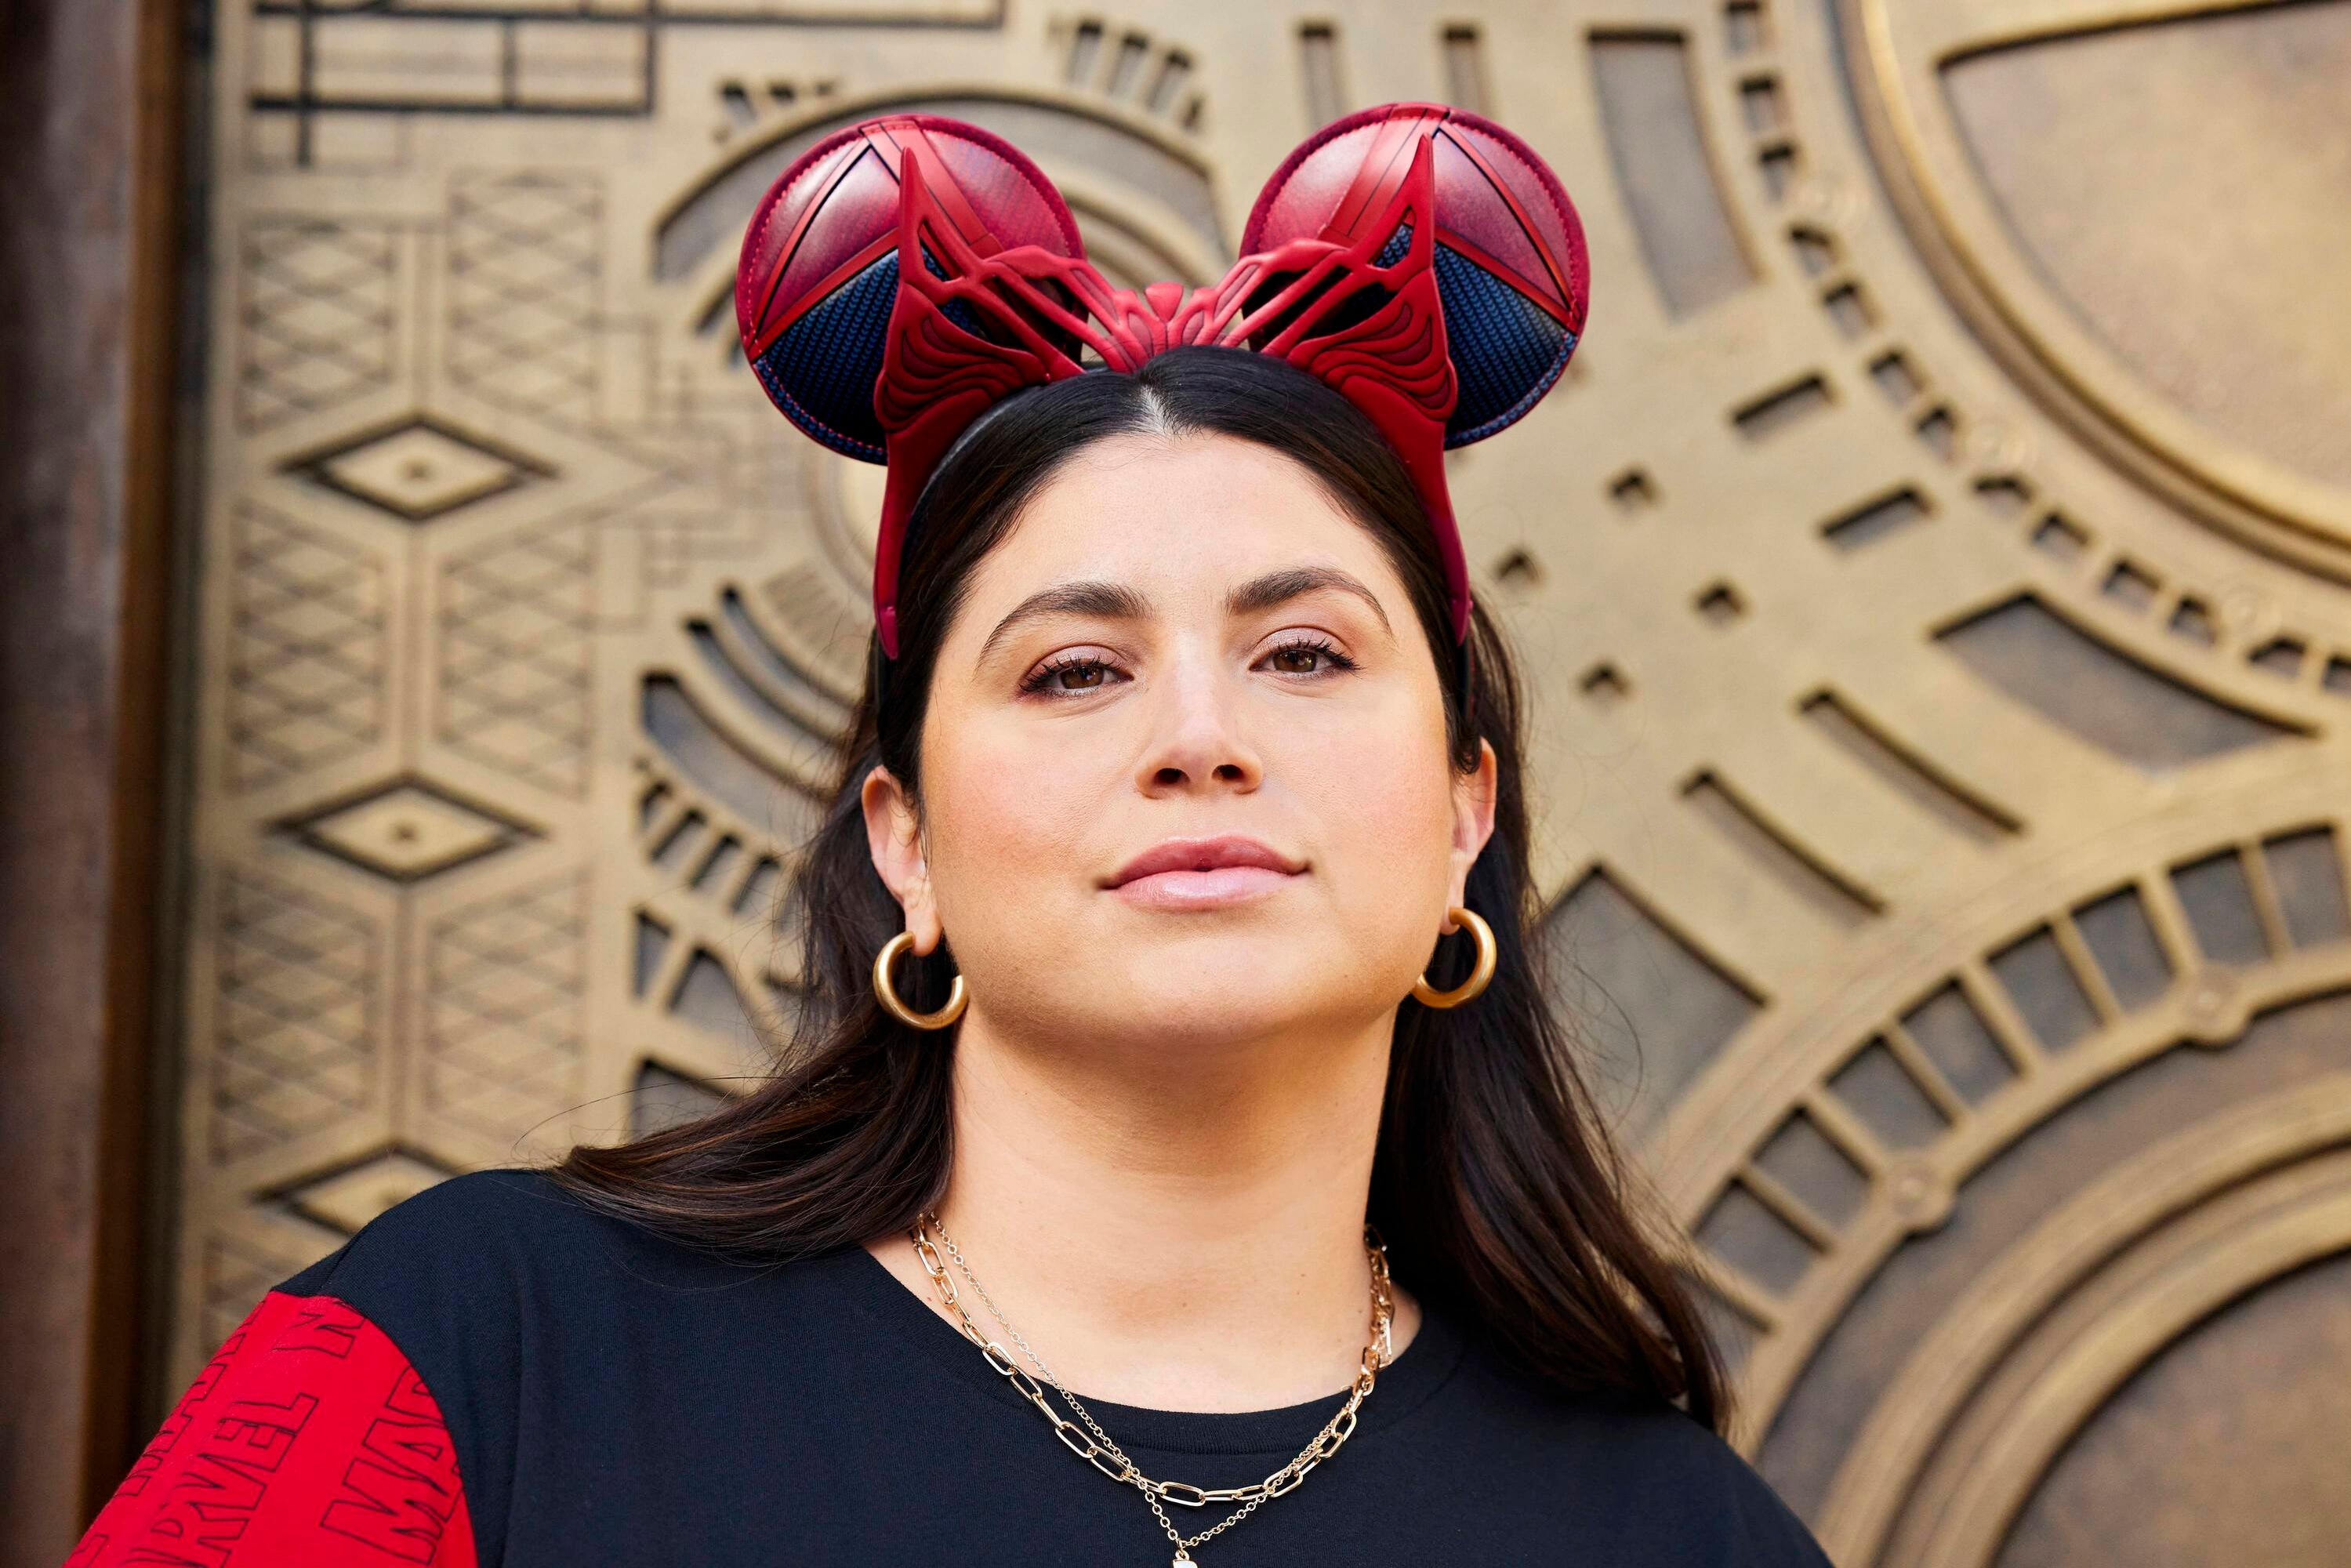 scrlet-witch-mouse-ears.jpg